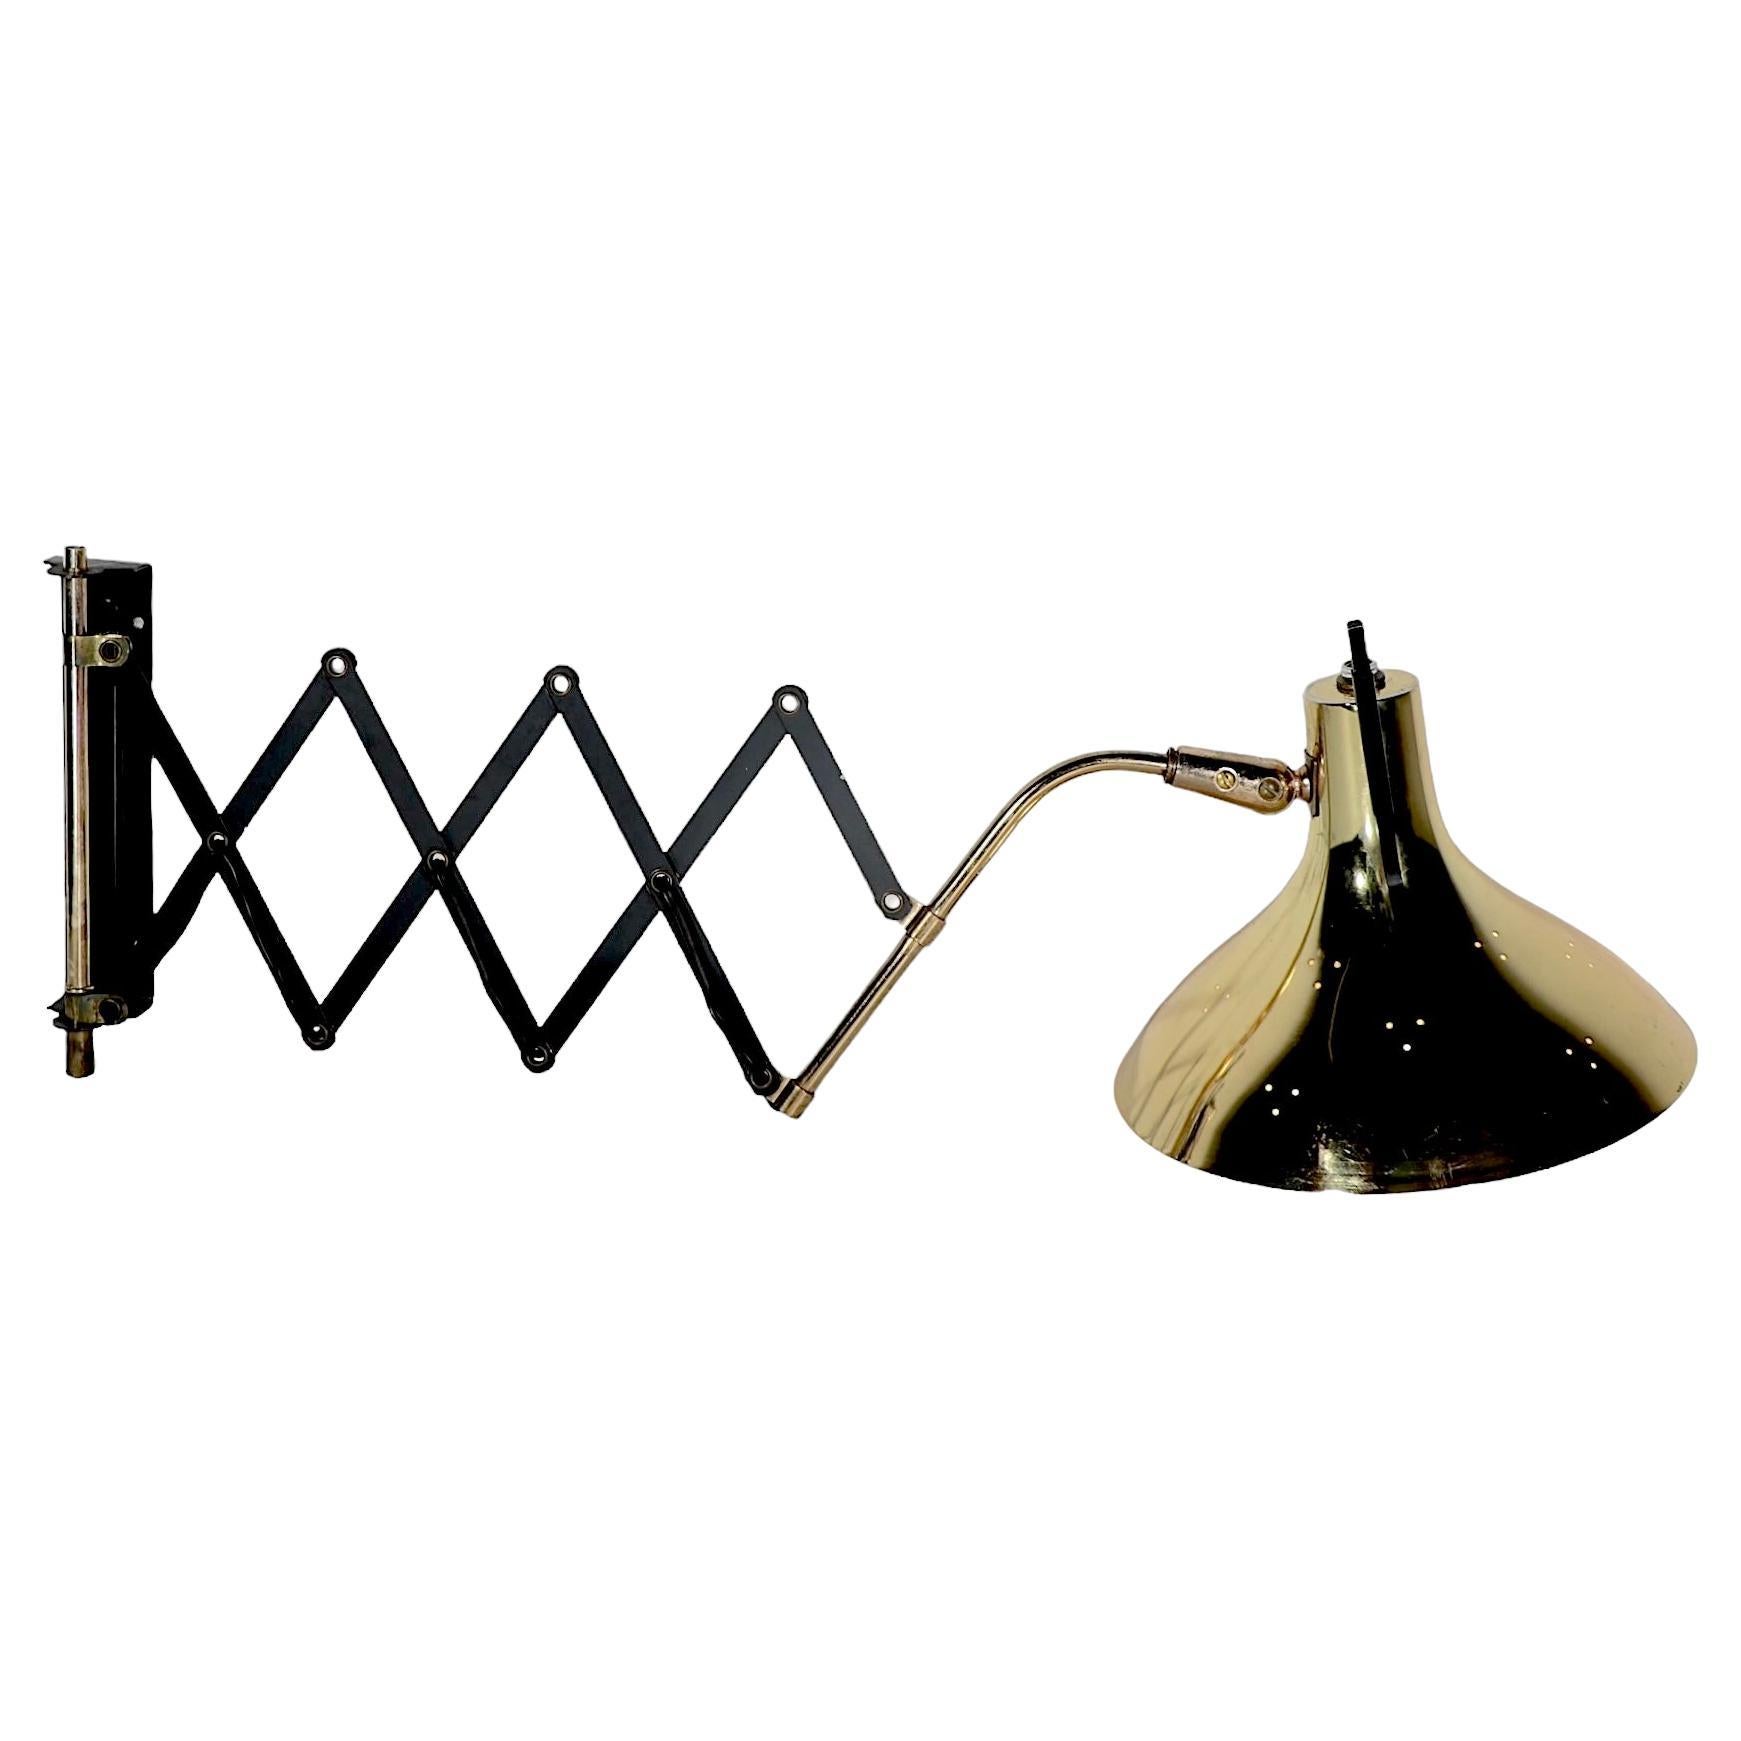 Mid Century architectural  flex arm wall mount pin up sconce, attributed to Gerald Thurston, for Lightolier. 
The sconce features a bell form shade constructed of brass, with decorative hole piercing, and a black iron handle to direct the light. The